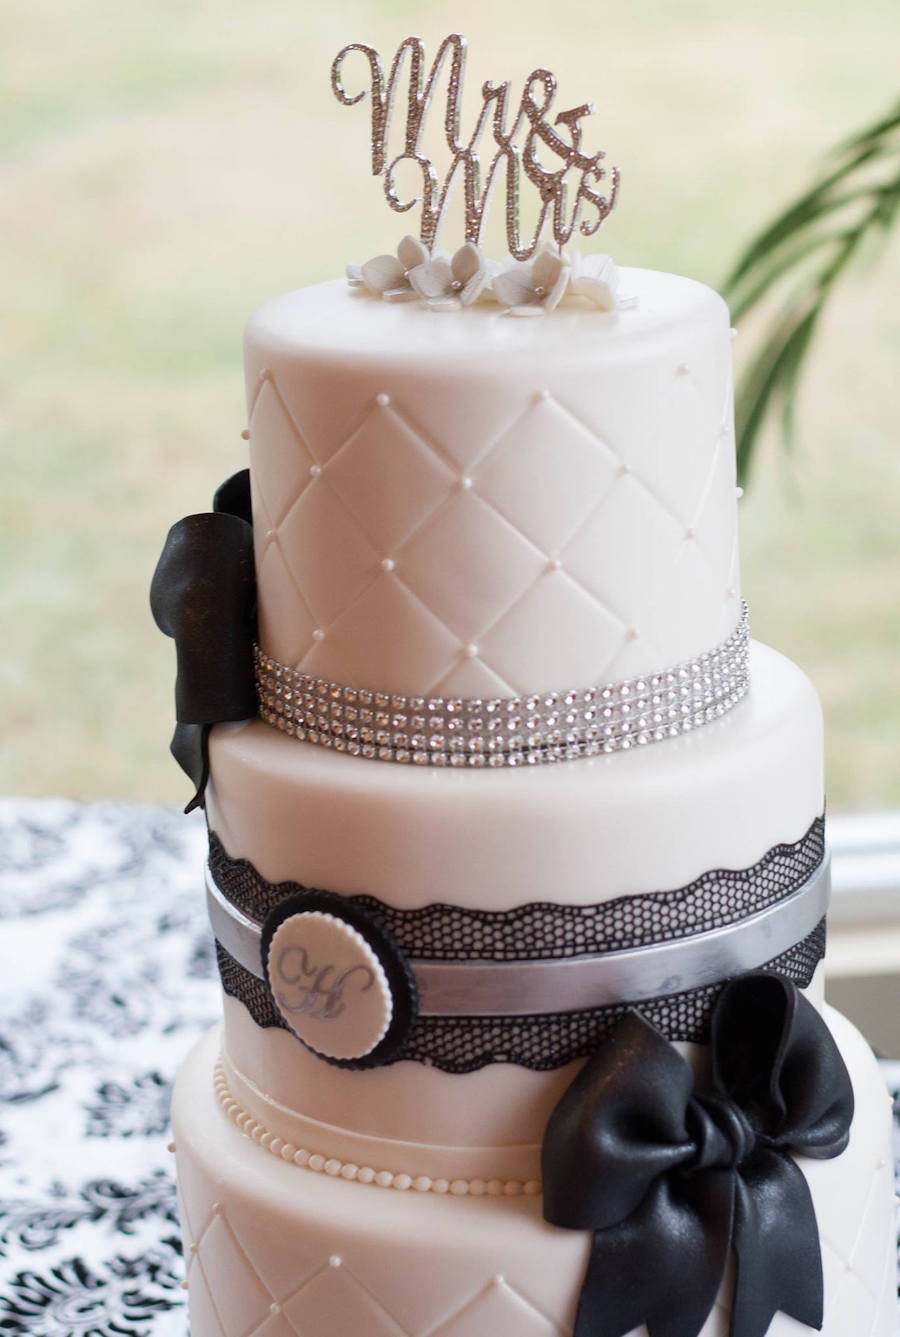 Elegant White Quilted Wedding Cake with Black Lace Ribbon | St. Pete Wedding Cake & Pastry Chef | Trudy Melissa Cakes